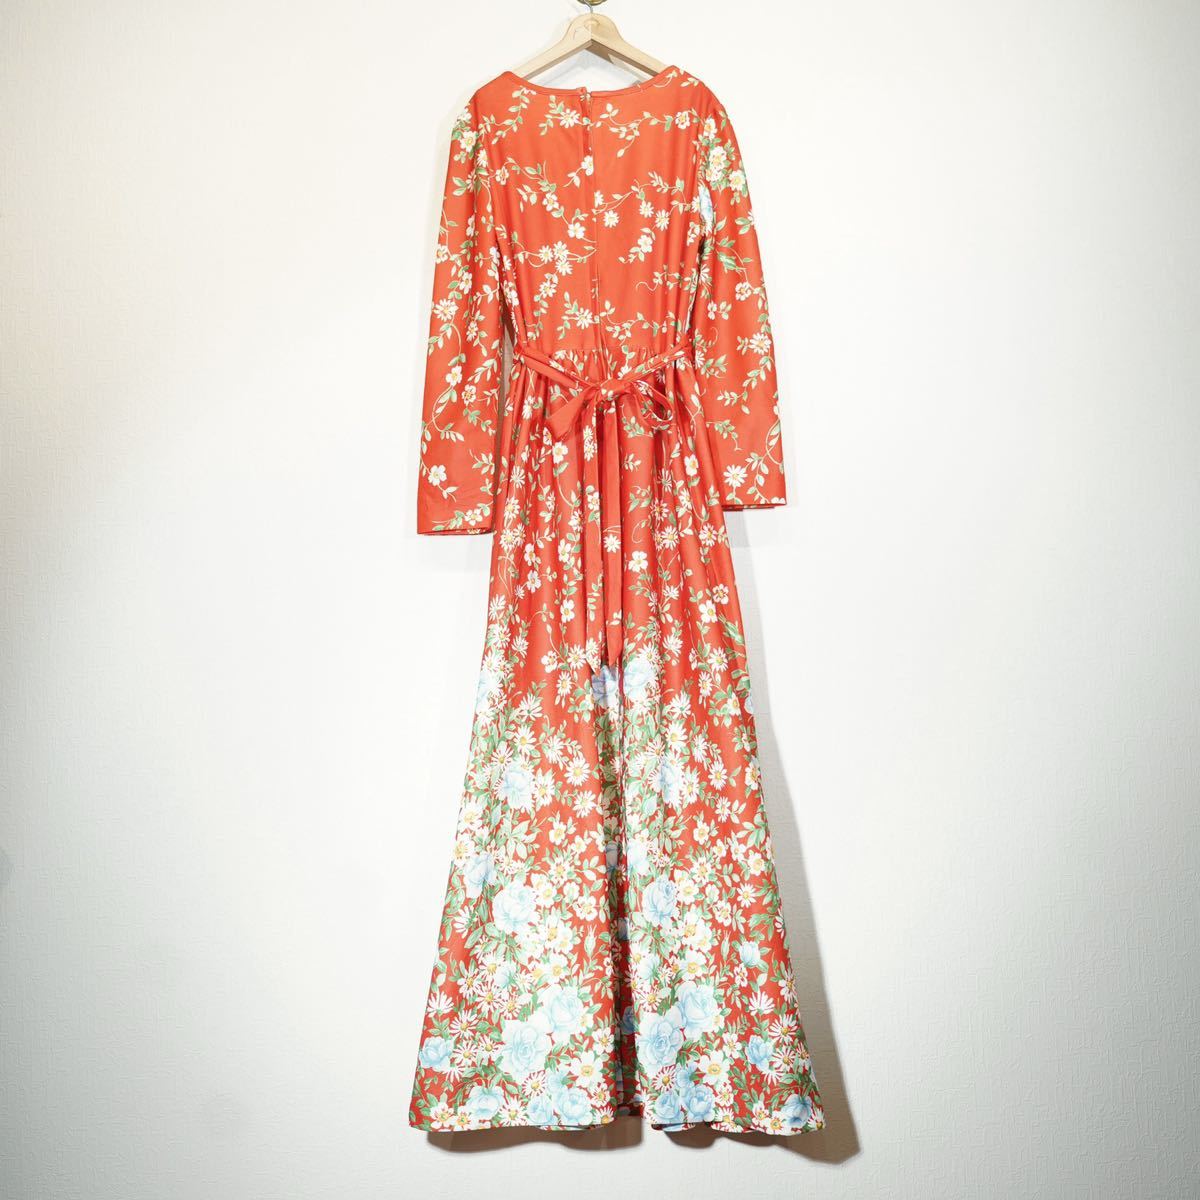 70's USA VINTAGE FLOWER PATTERNED BELTED LONG DRESS ONE PIECE/70年代アメリカ古着花柄ベルテッドロングドレスワンピース_画像6